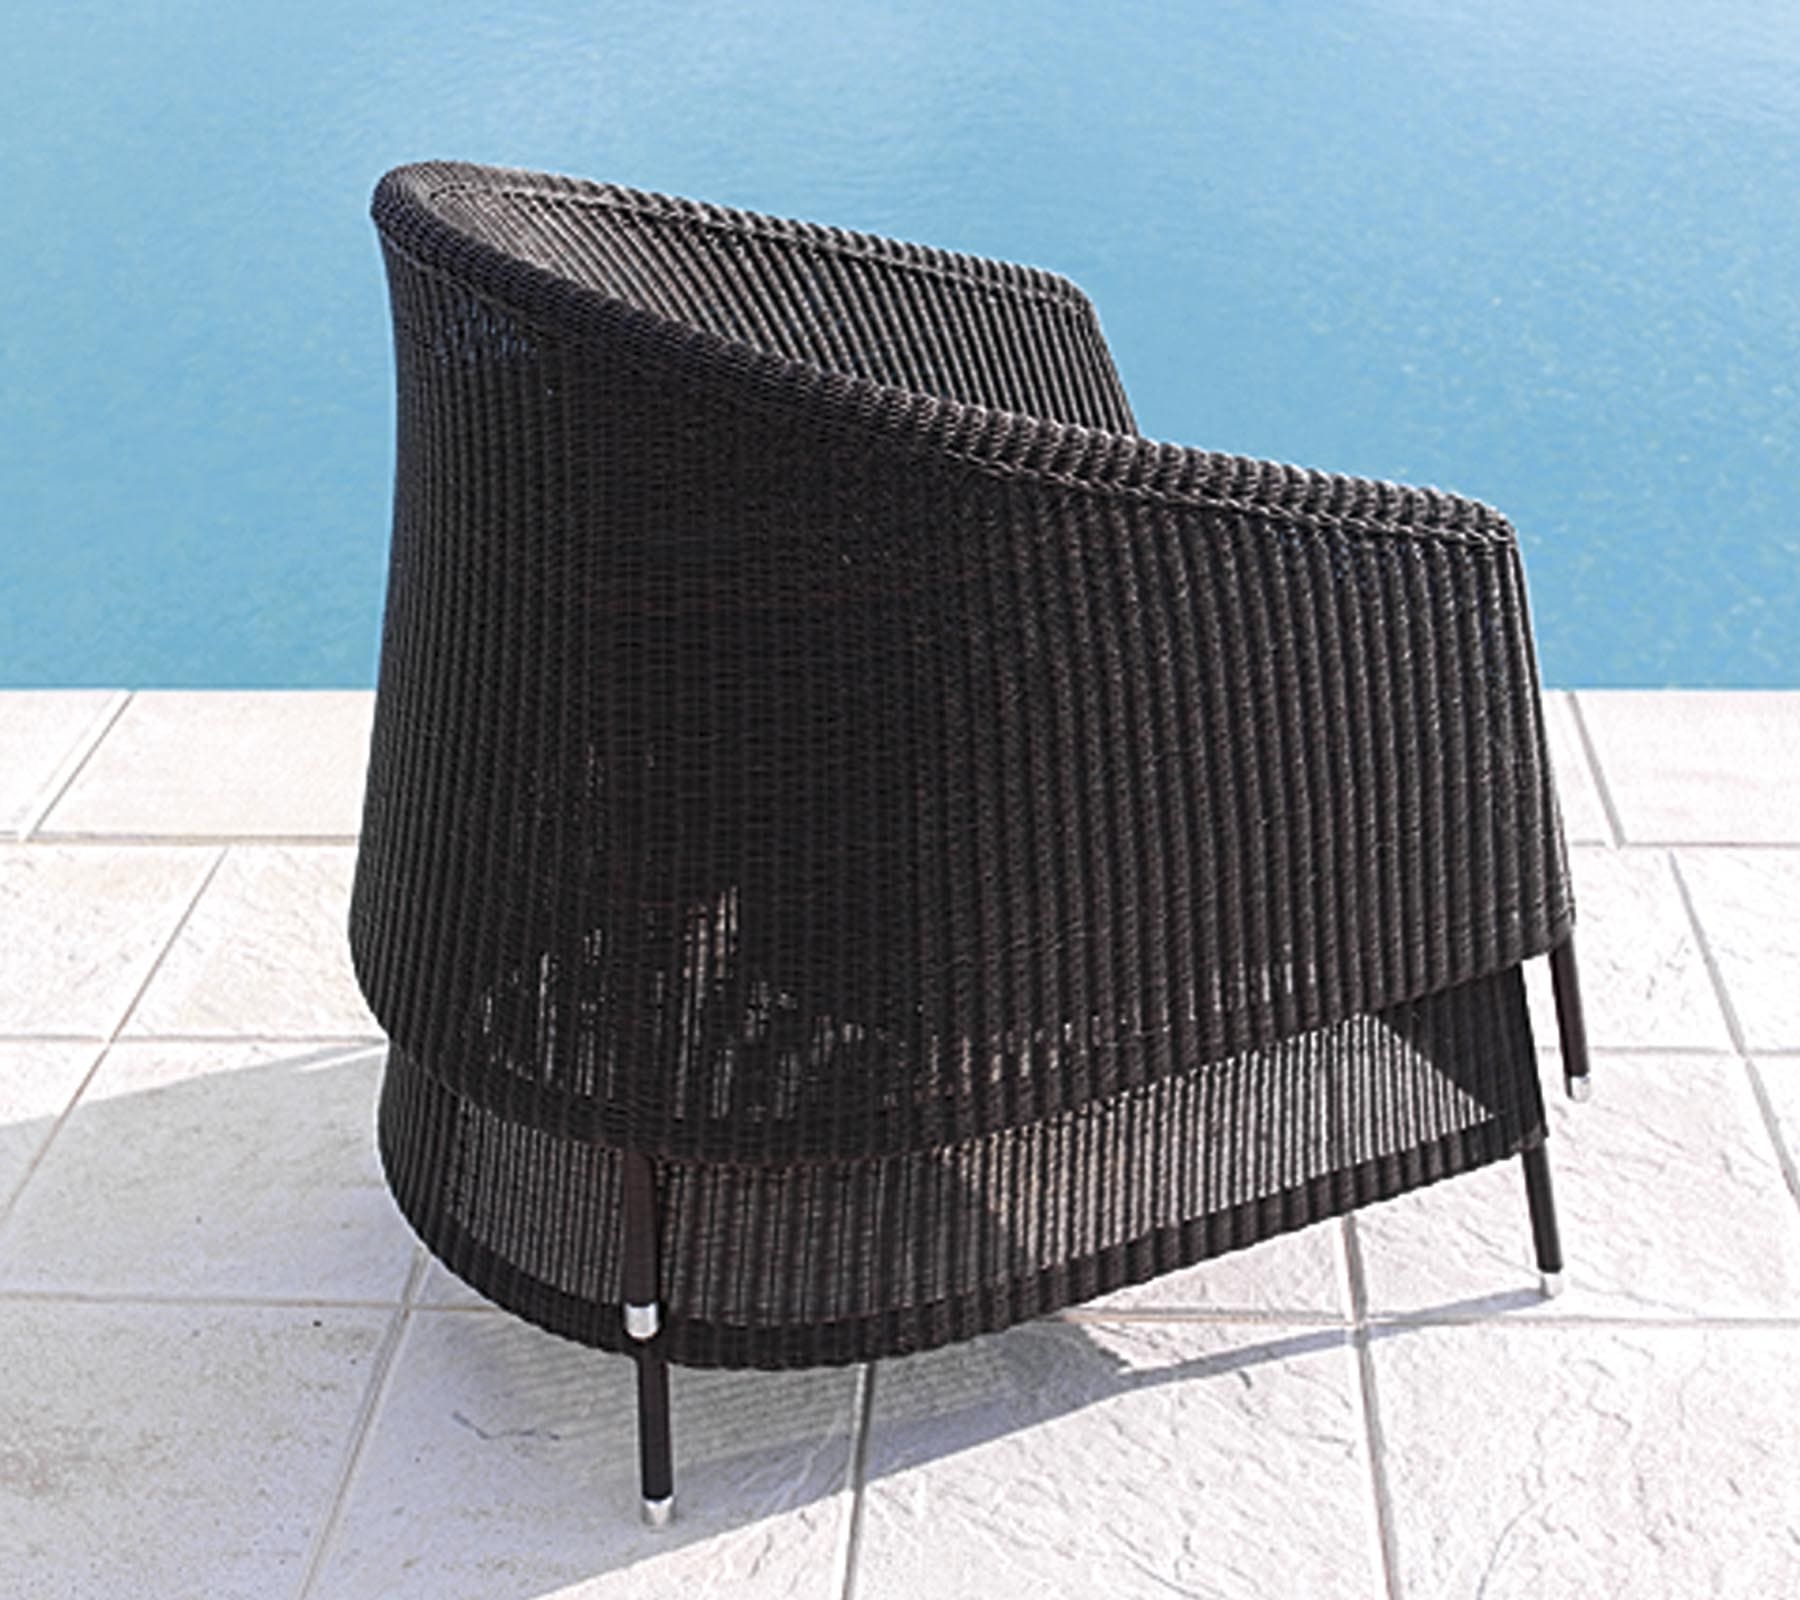 Boxhill's Kingston Outdoor Stackable Lounge Chair lifestyle image piled up at poolside